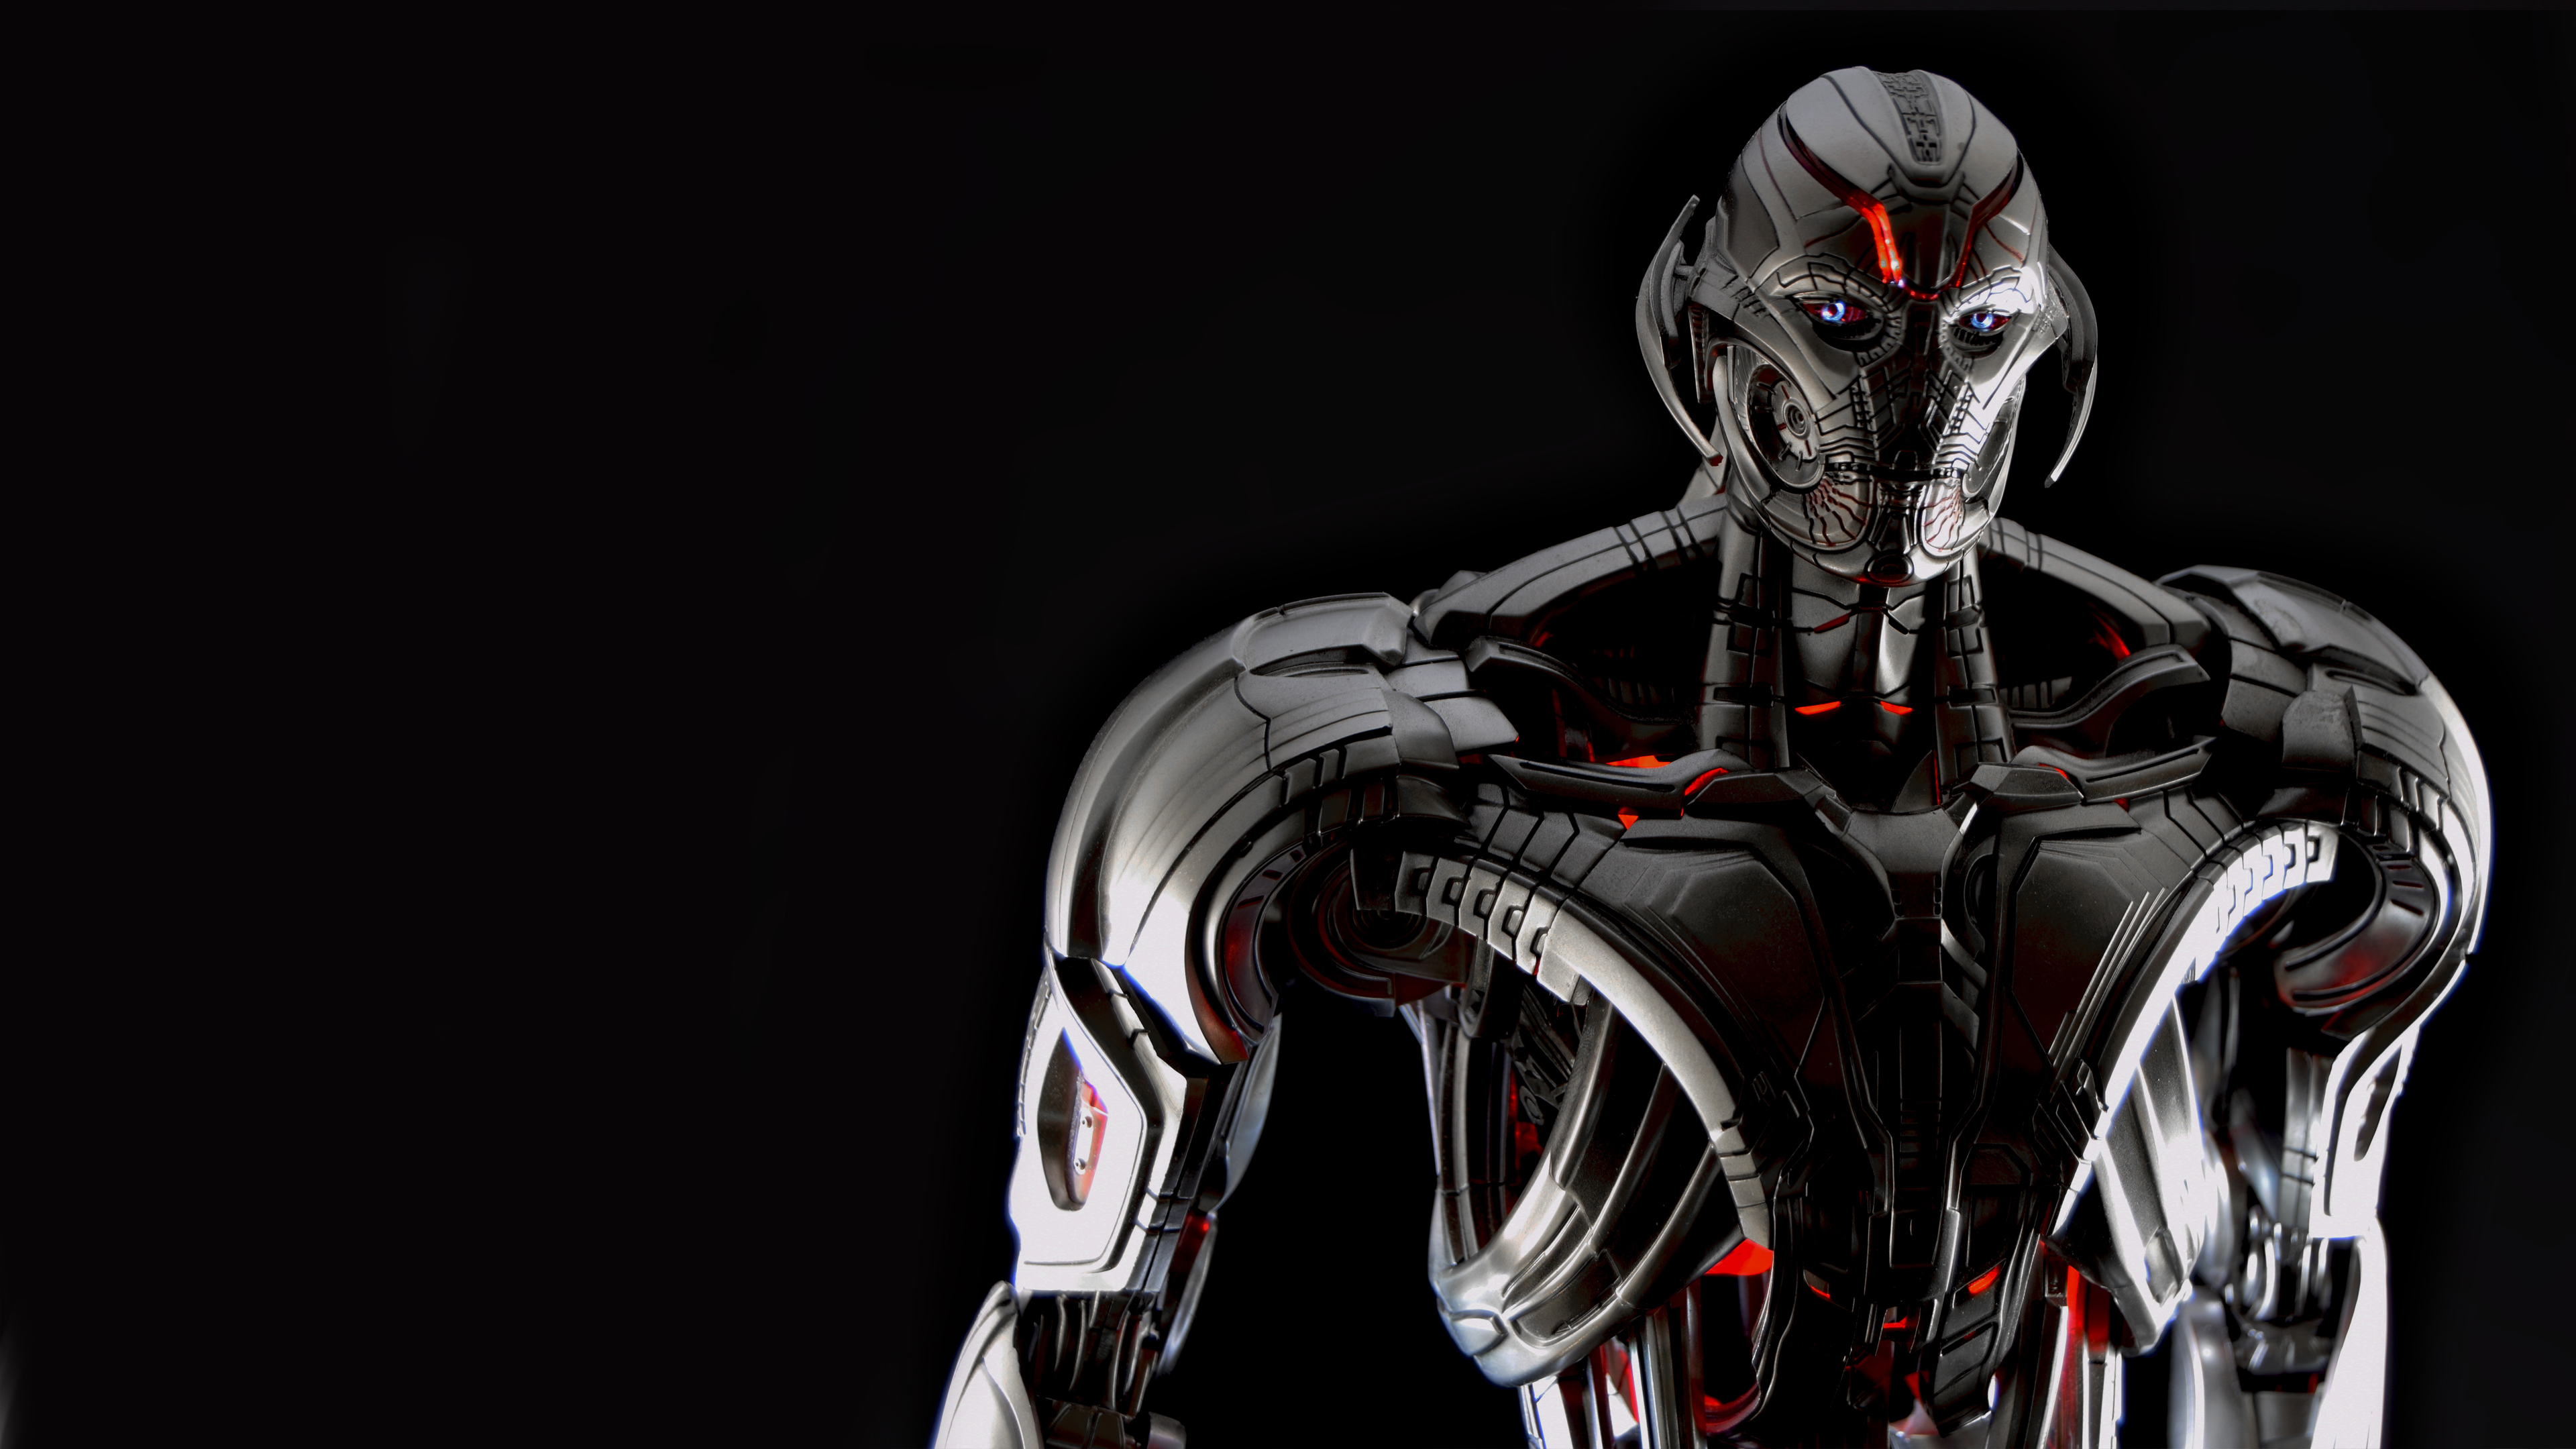 ultron, figurine, man made, toy, avengers: age of ultron